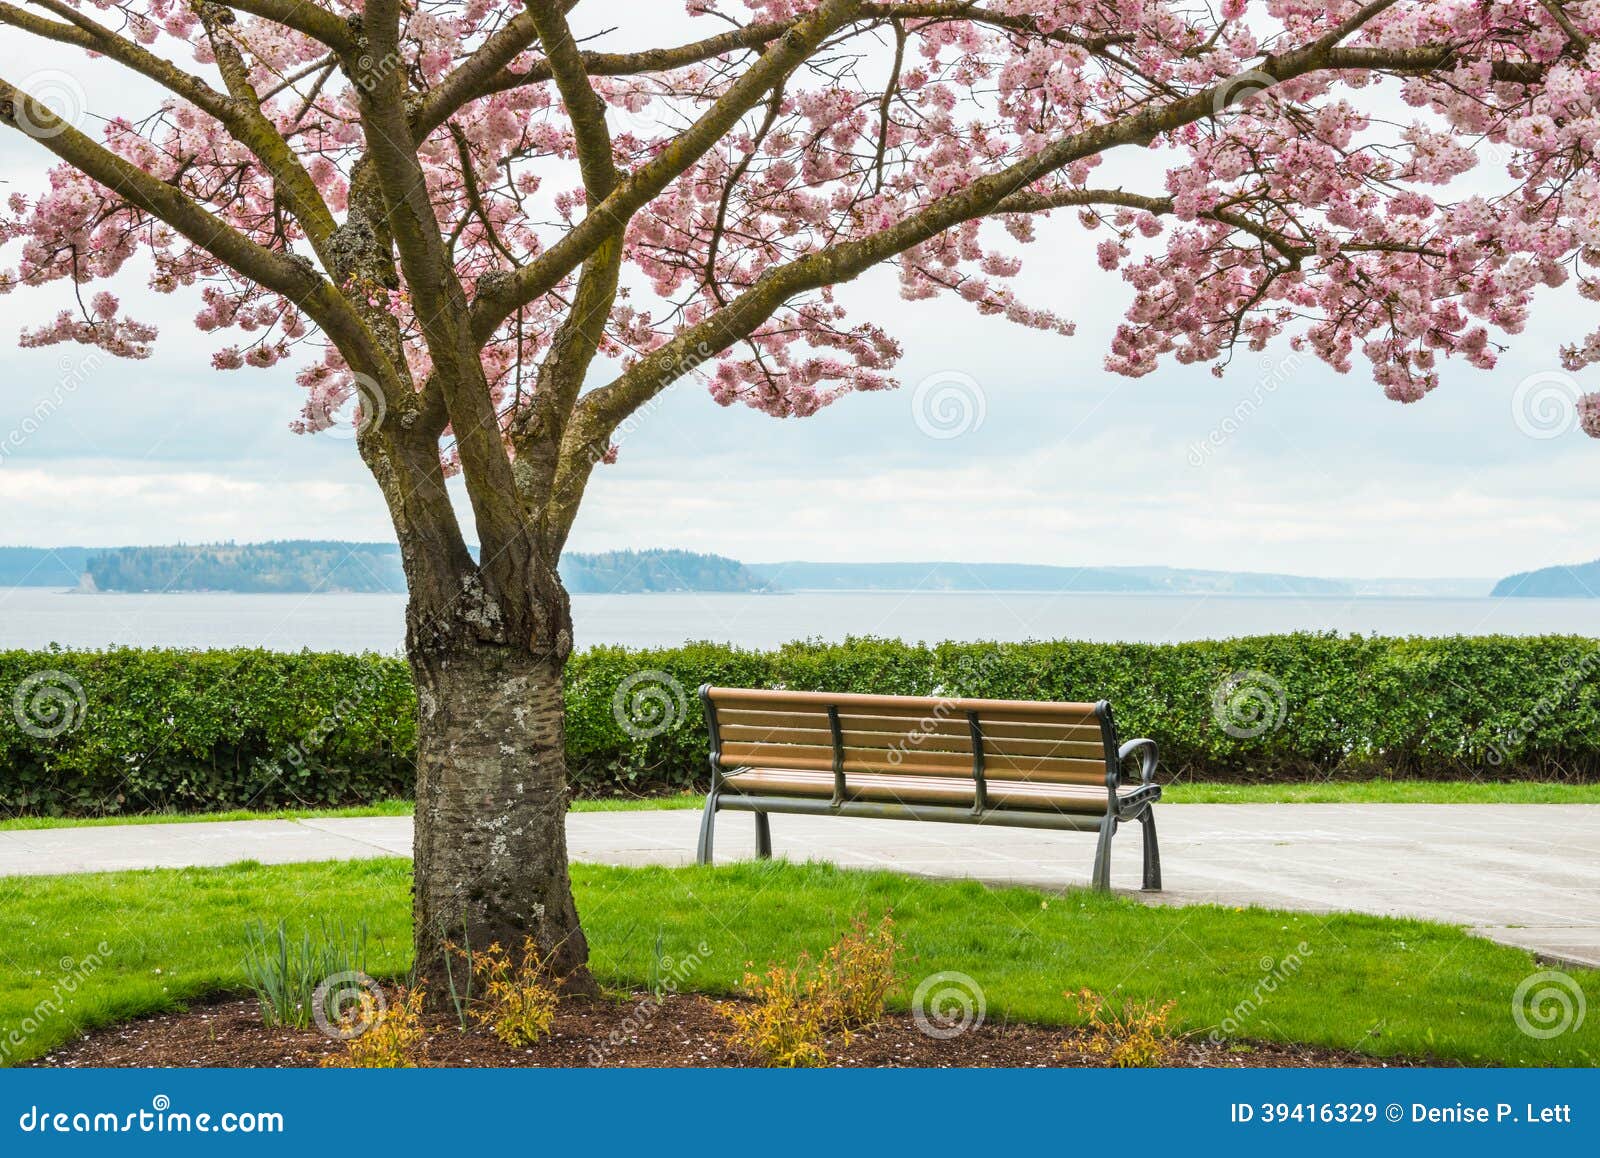 blooming cherry tree park bench sea